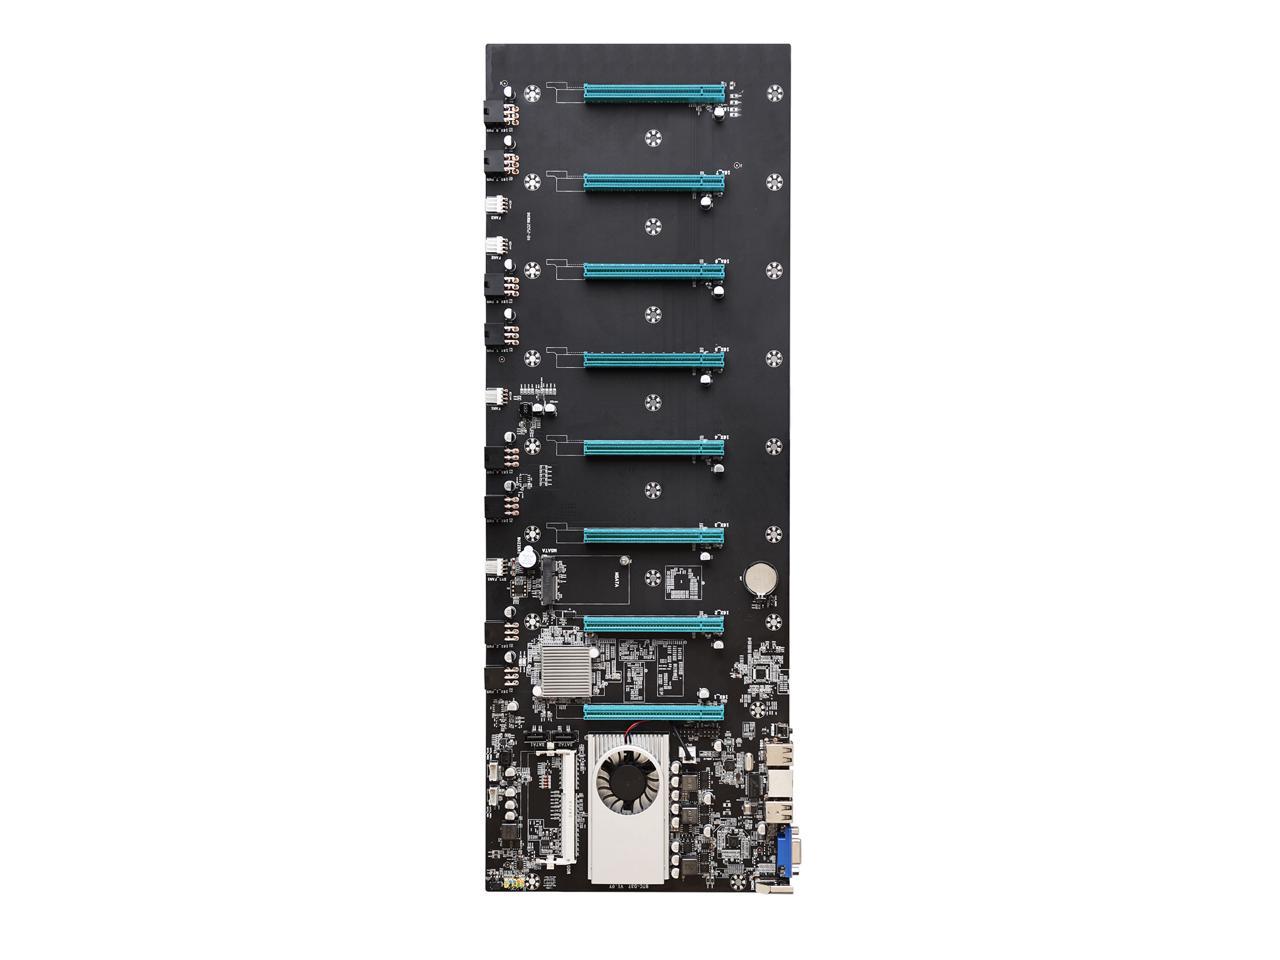 Btc-S37 Miner Motherboard Cpu Set 8 Video Card Slot Ddr3 Memory Integrated Vga Low Power Consumption Exquisite Better Than X99